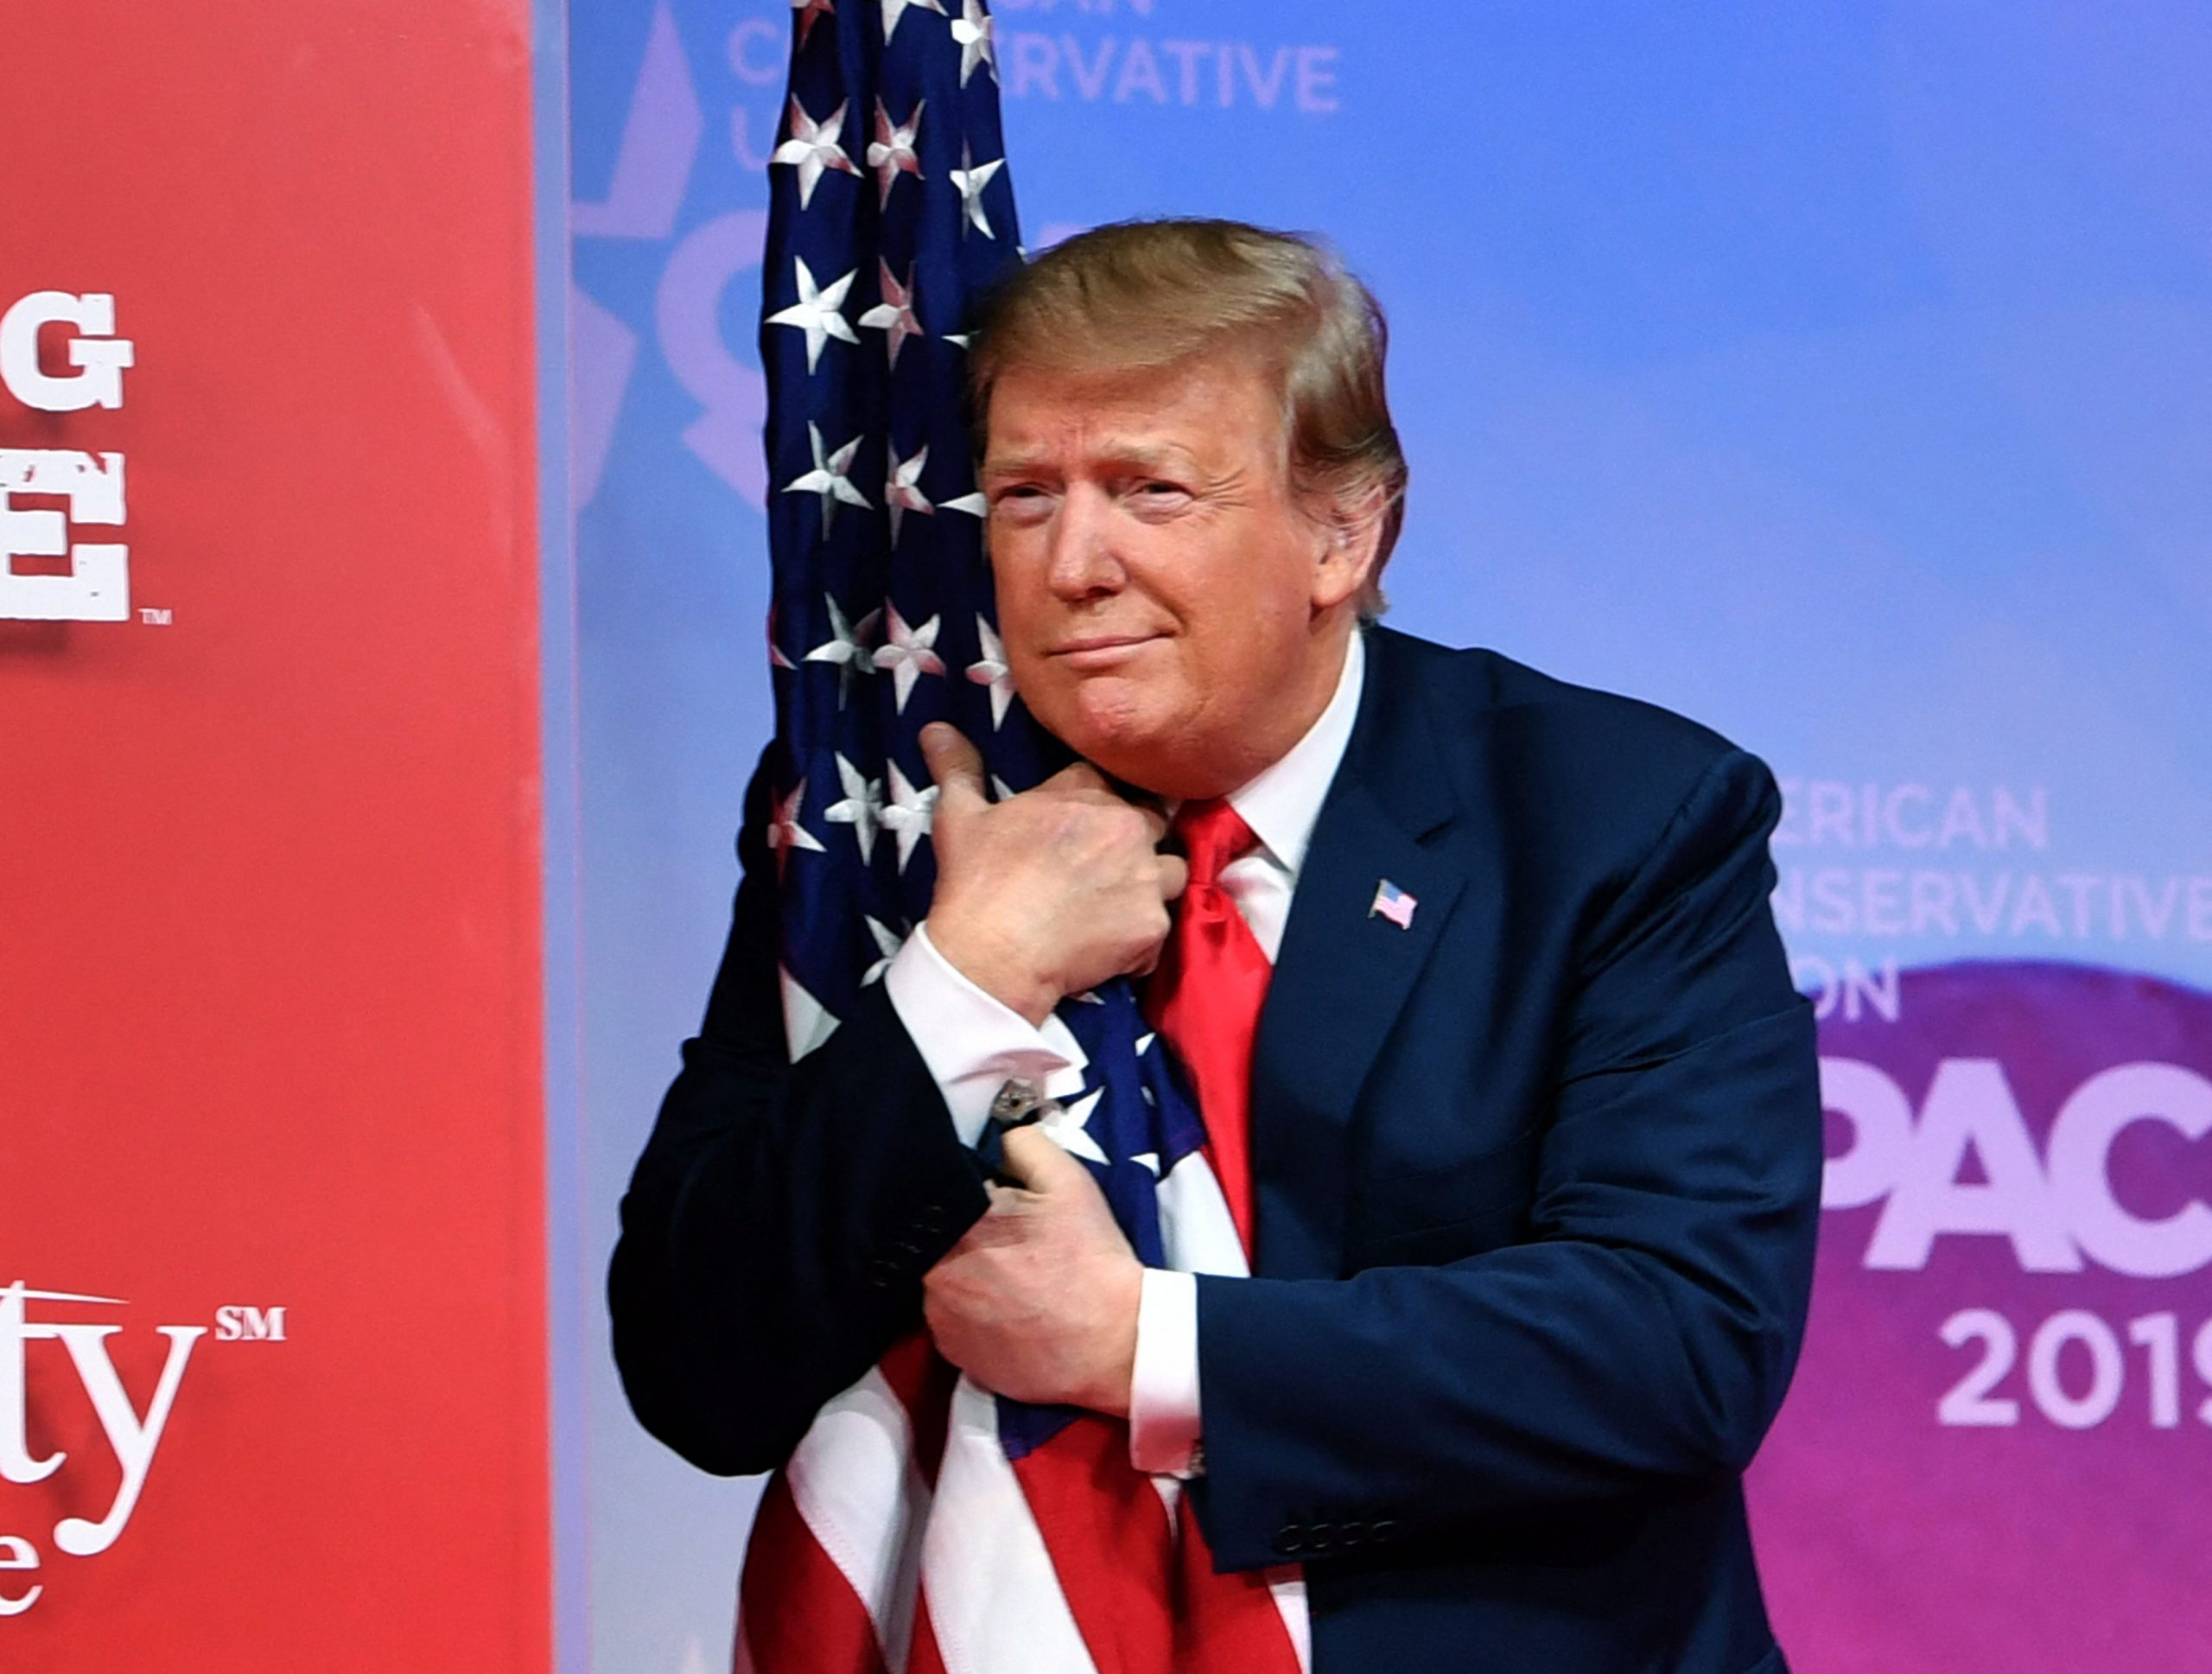 Excerpts from Donald Trump’s speech at CPAC 2021